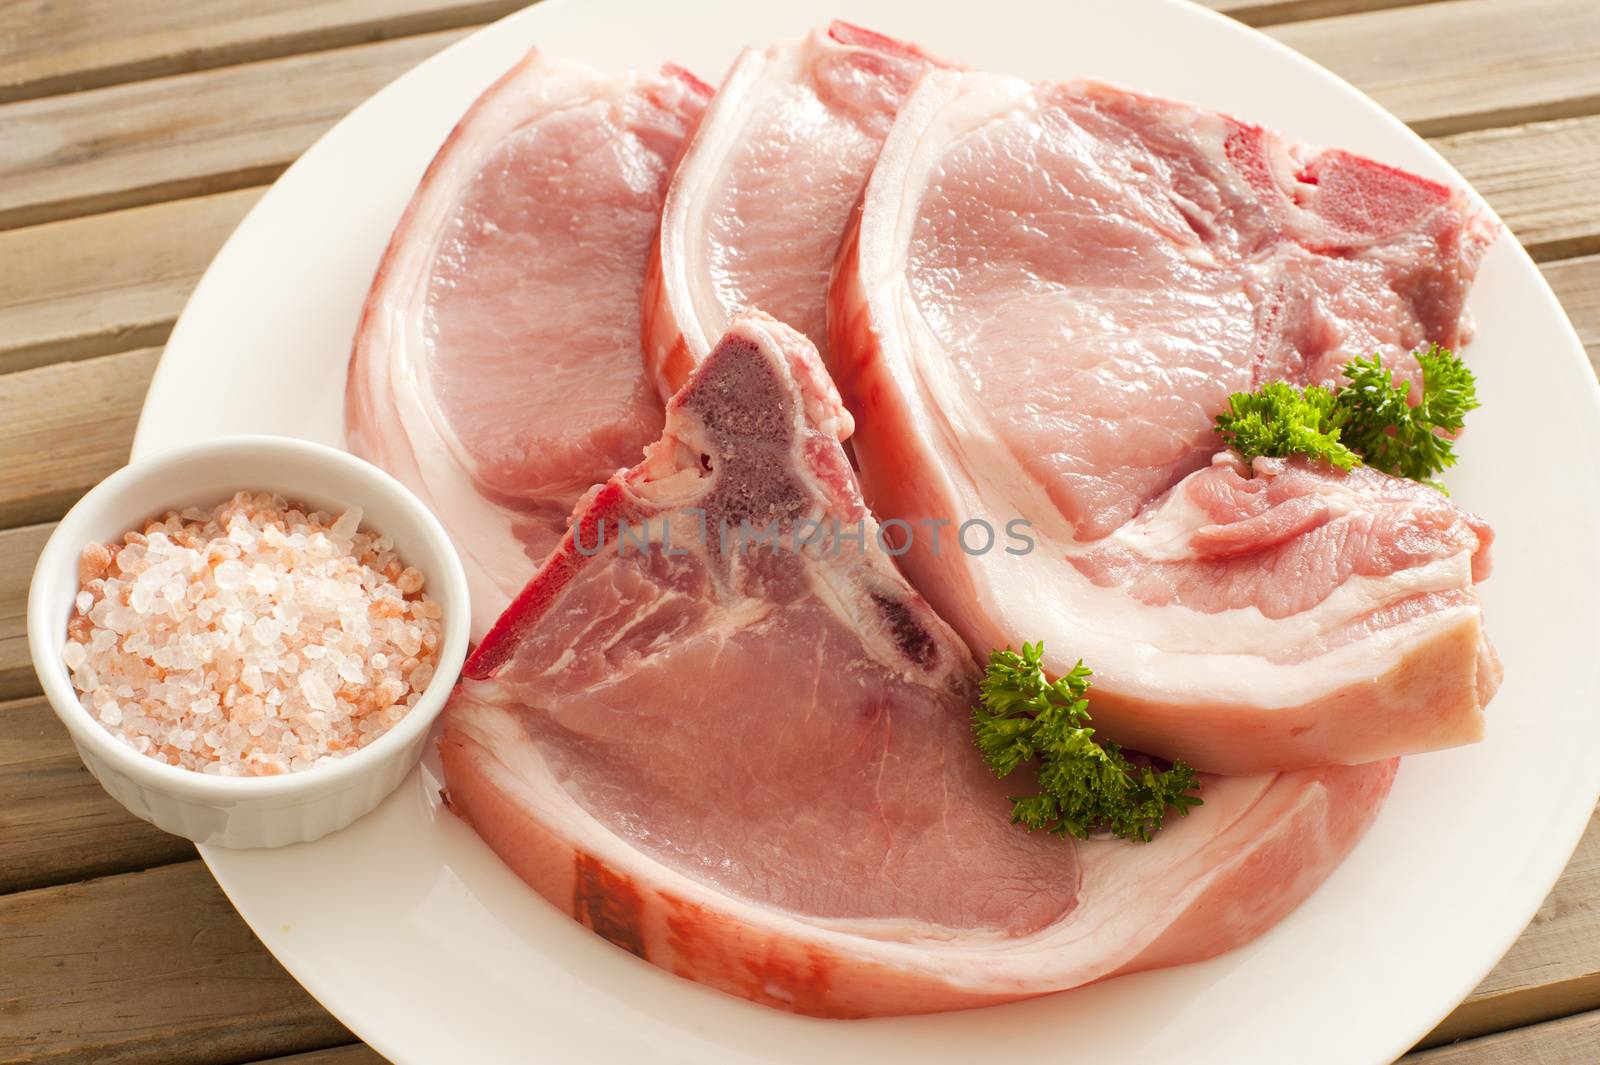 Fresh Pork Chops on Plate with Rock Salt by stockarch